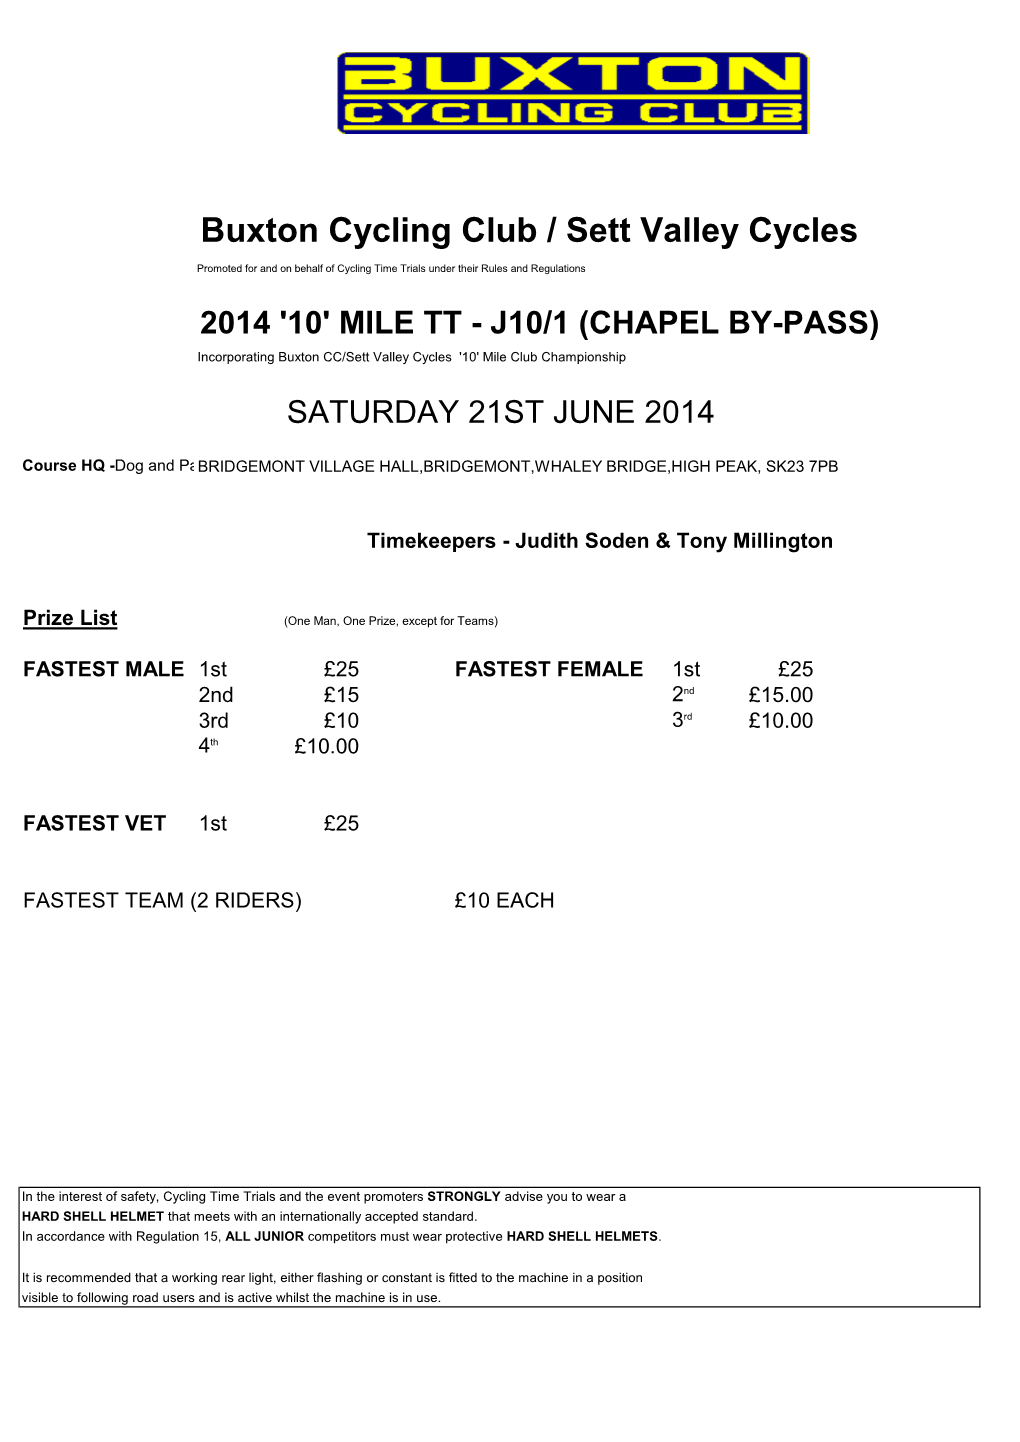 Buxton Cycling Club / Sett Valley Cycles Promoted for and on Behalf of Cycling Time Trials Under Their Rules and Regulations